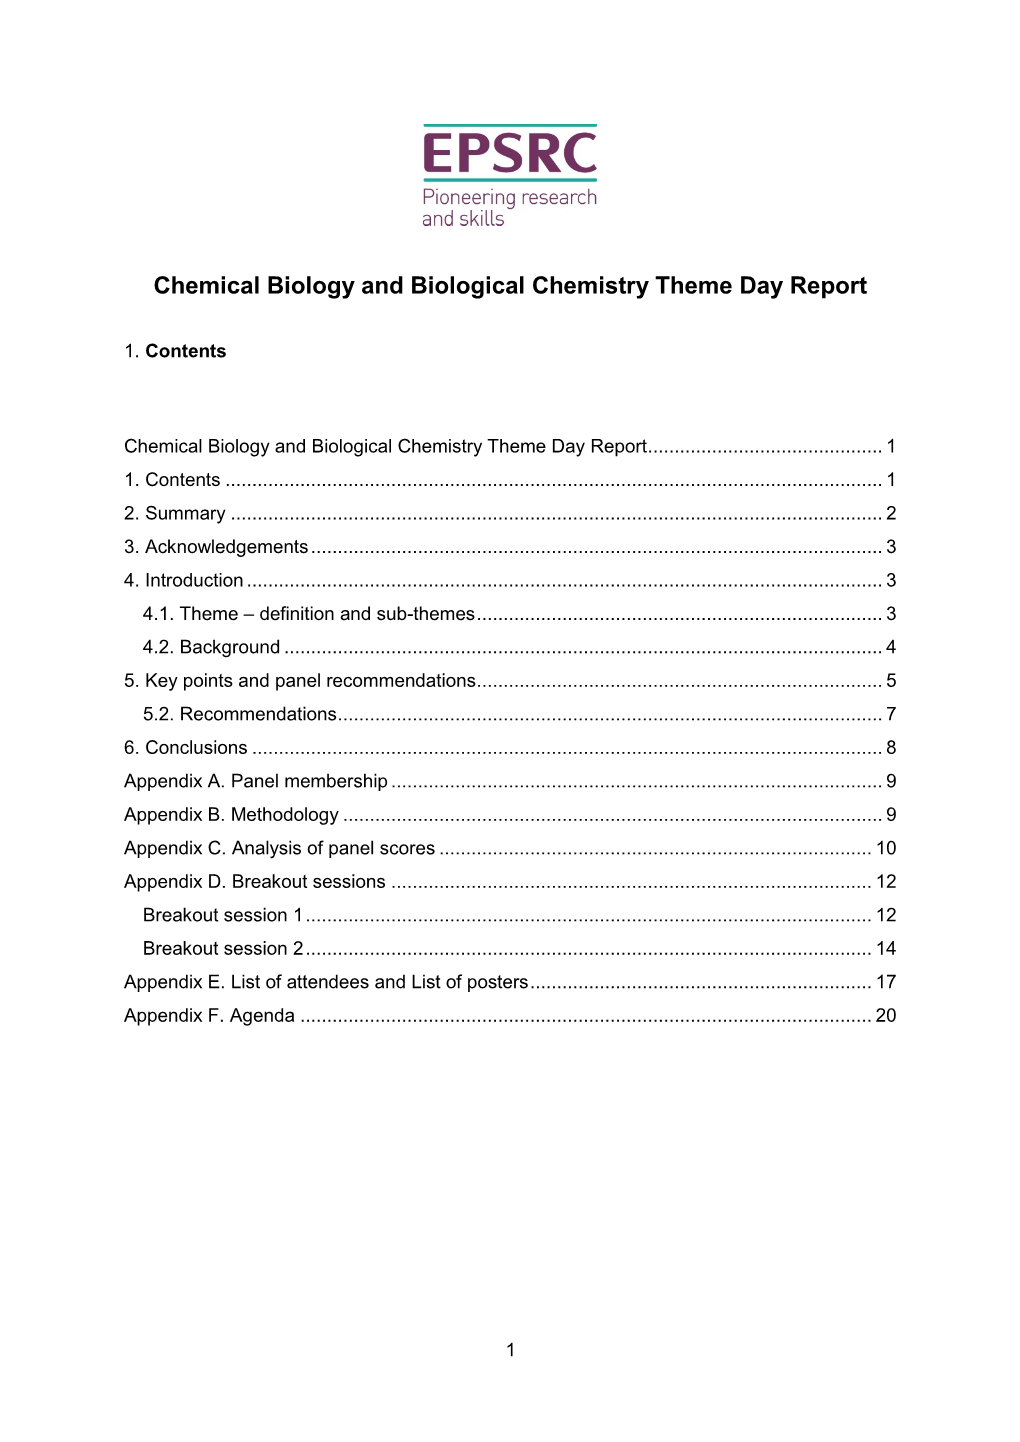 Chemical Biology and Biological Chemistry Theme Day Report